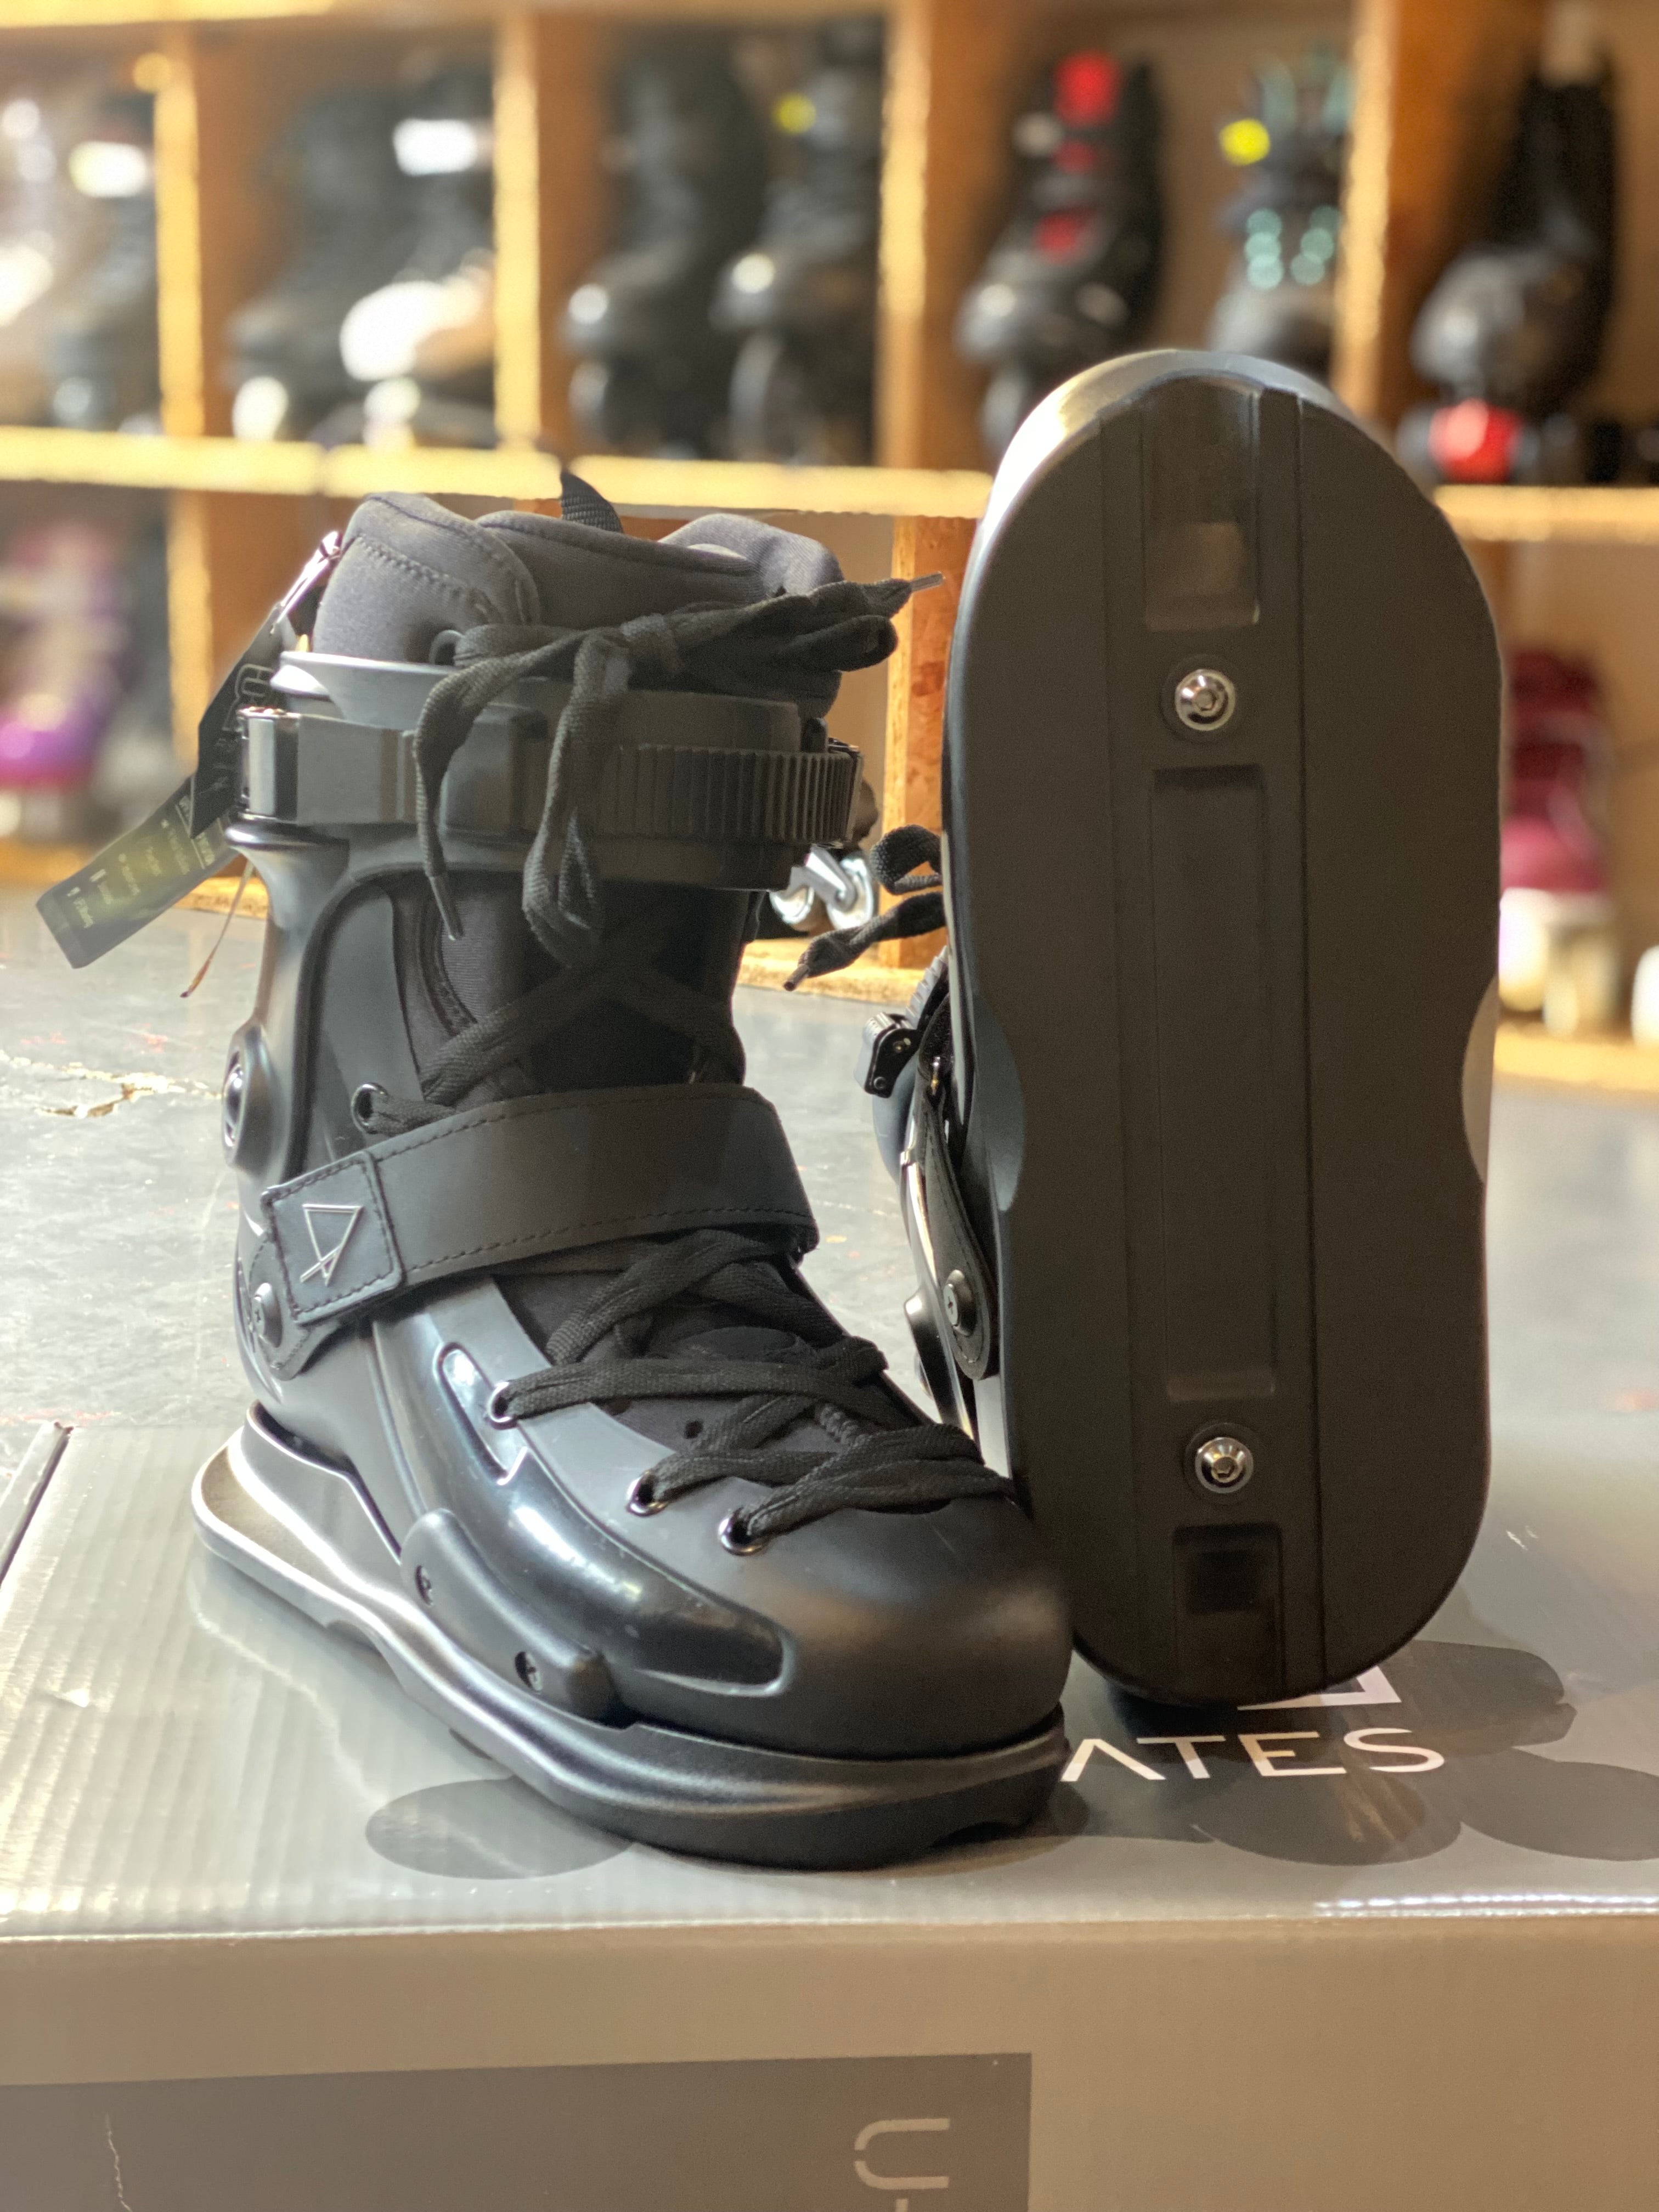 FR x Intuition AP Boot Only Inline Skates